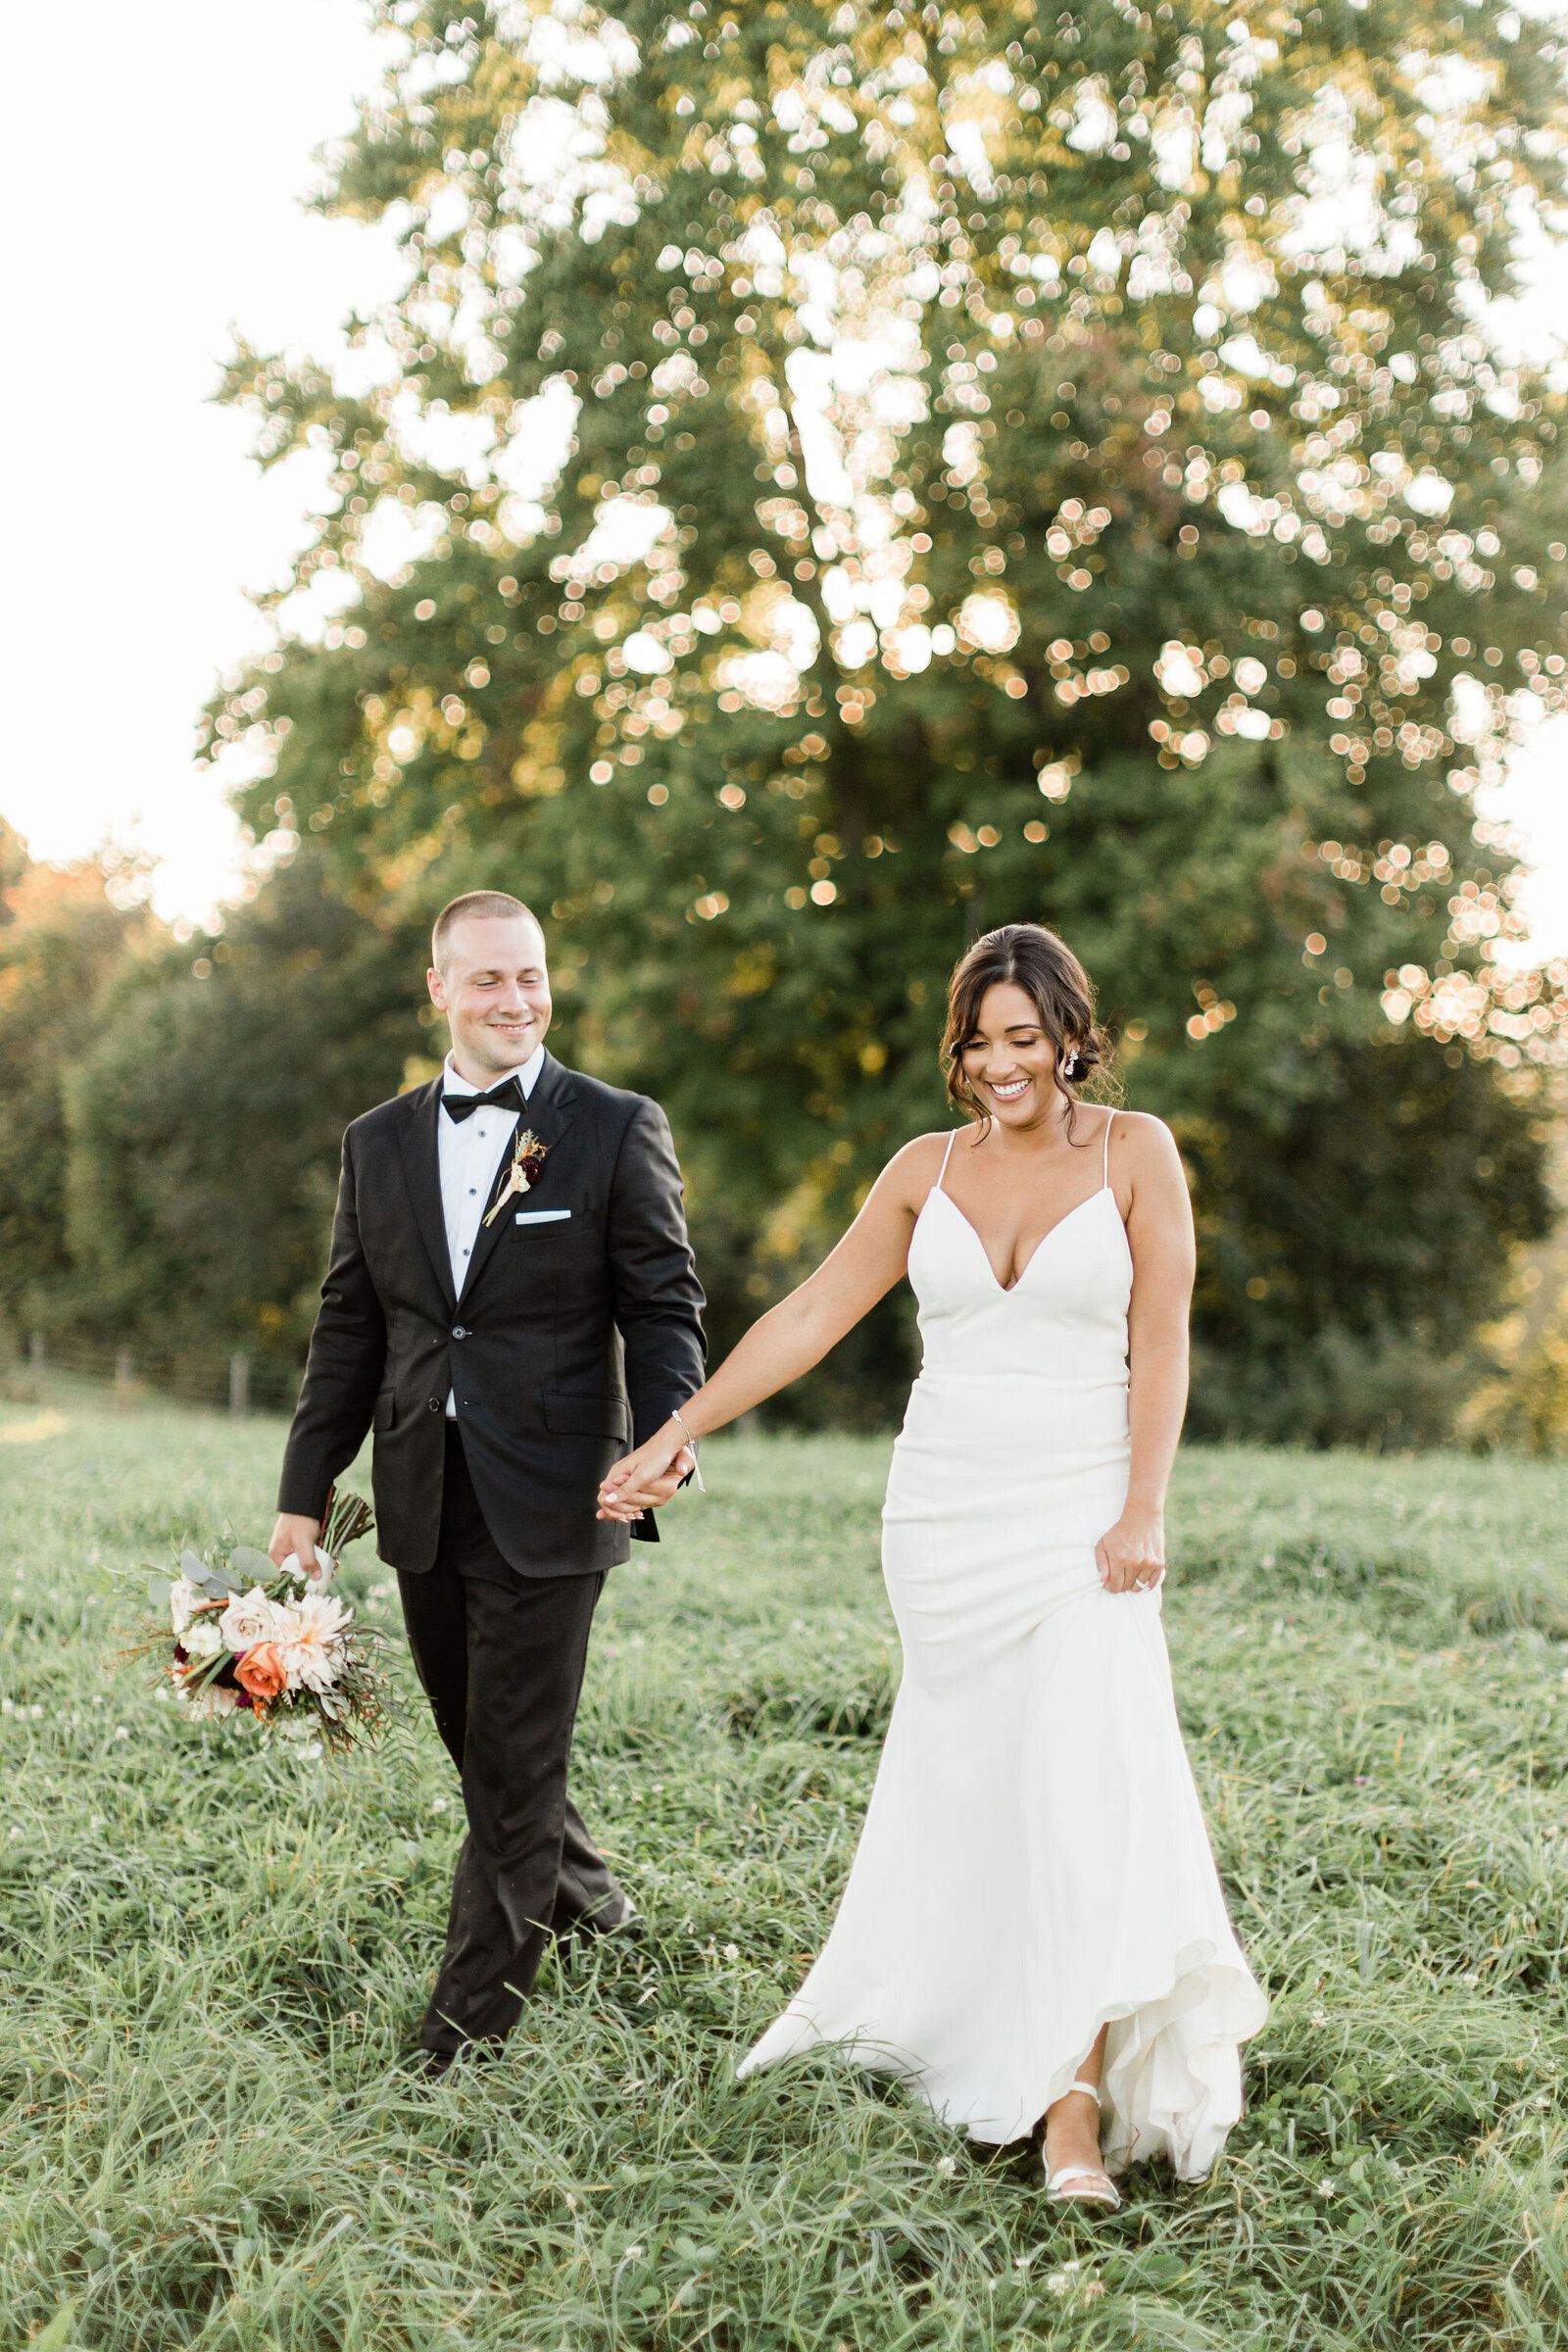 Wedding Day Golden Hour | Cleveland OH | The Axtells Photo and Film